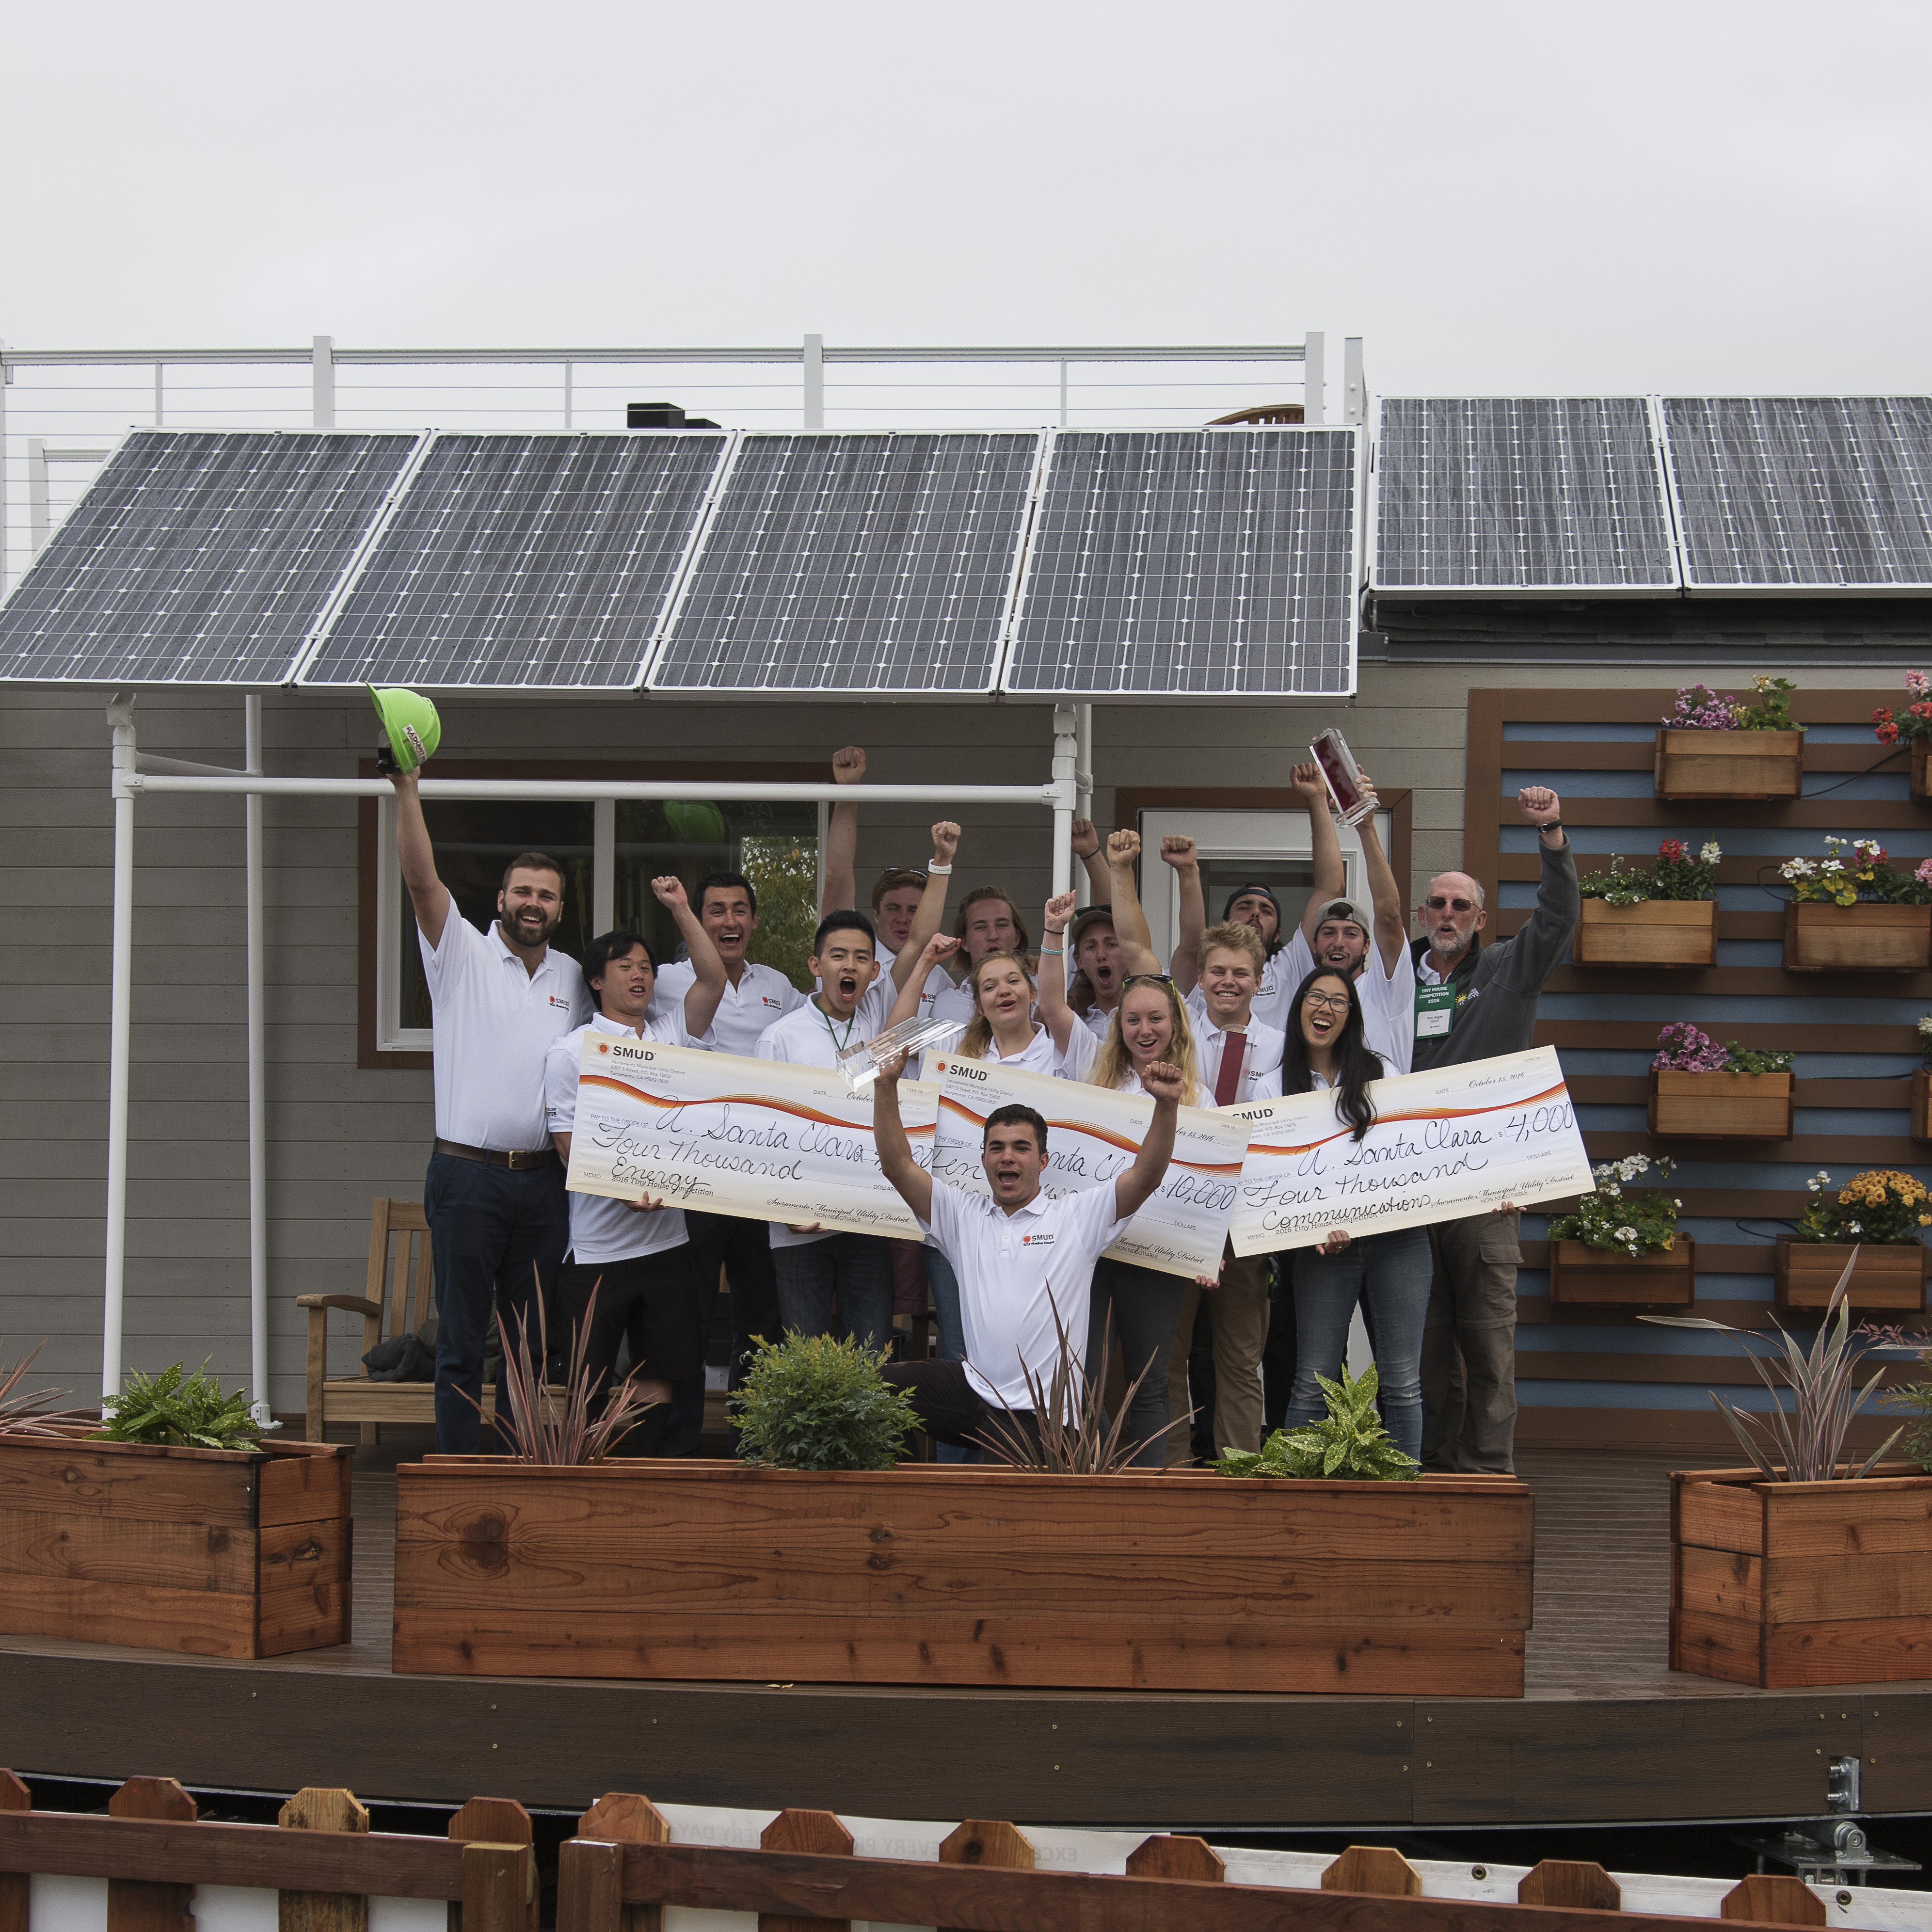 SCU's 2016 Tiny House team celebrates their victory in front of rEvolve House image link to story